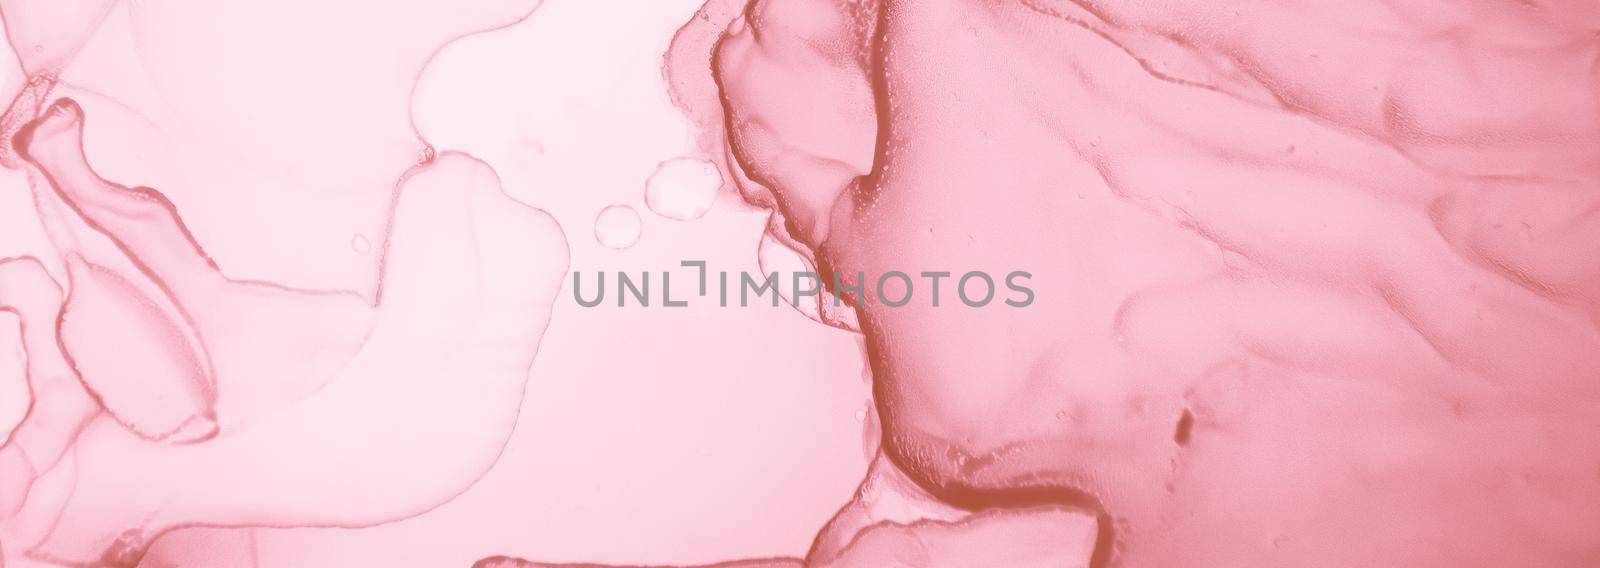 Feminine Luxury Marble. Abstract Mix. Ink Wave Paint. Acrylic Paper. Rose Oil Pattern. Alcohol Liquid Marble. Spring Illustration. Art Gradient Effect. Watercolor Pink Marble.